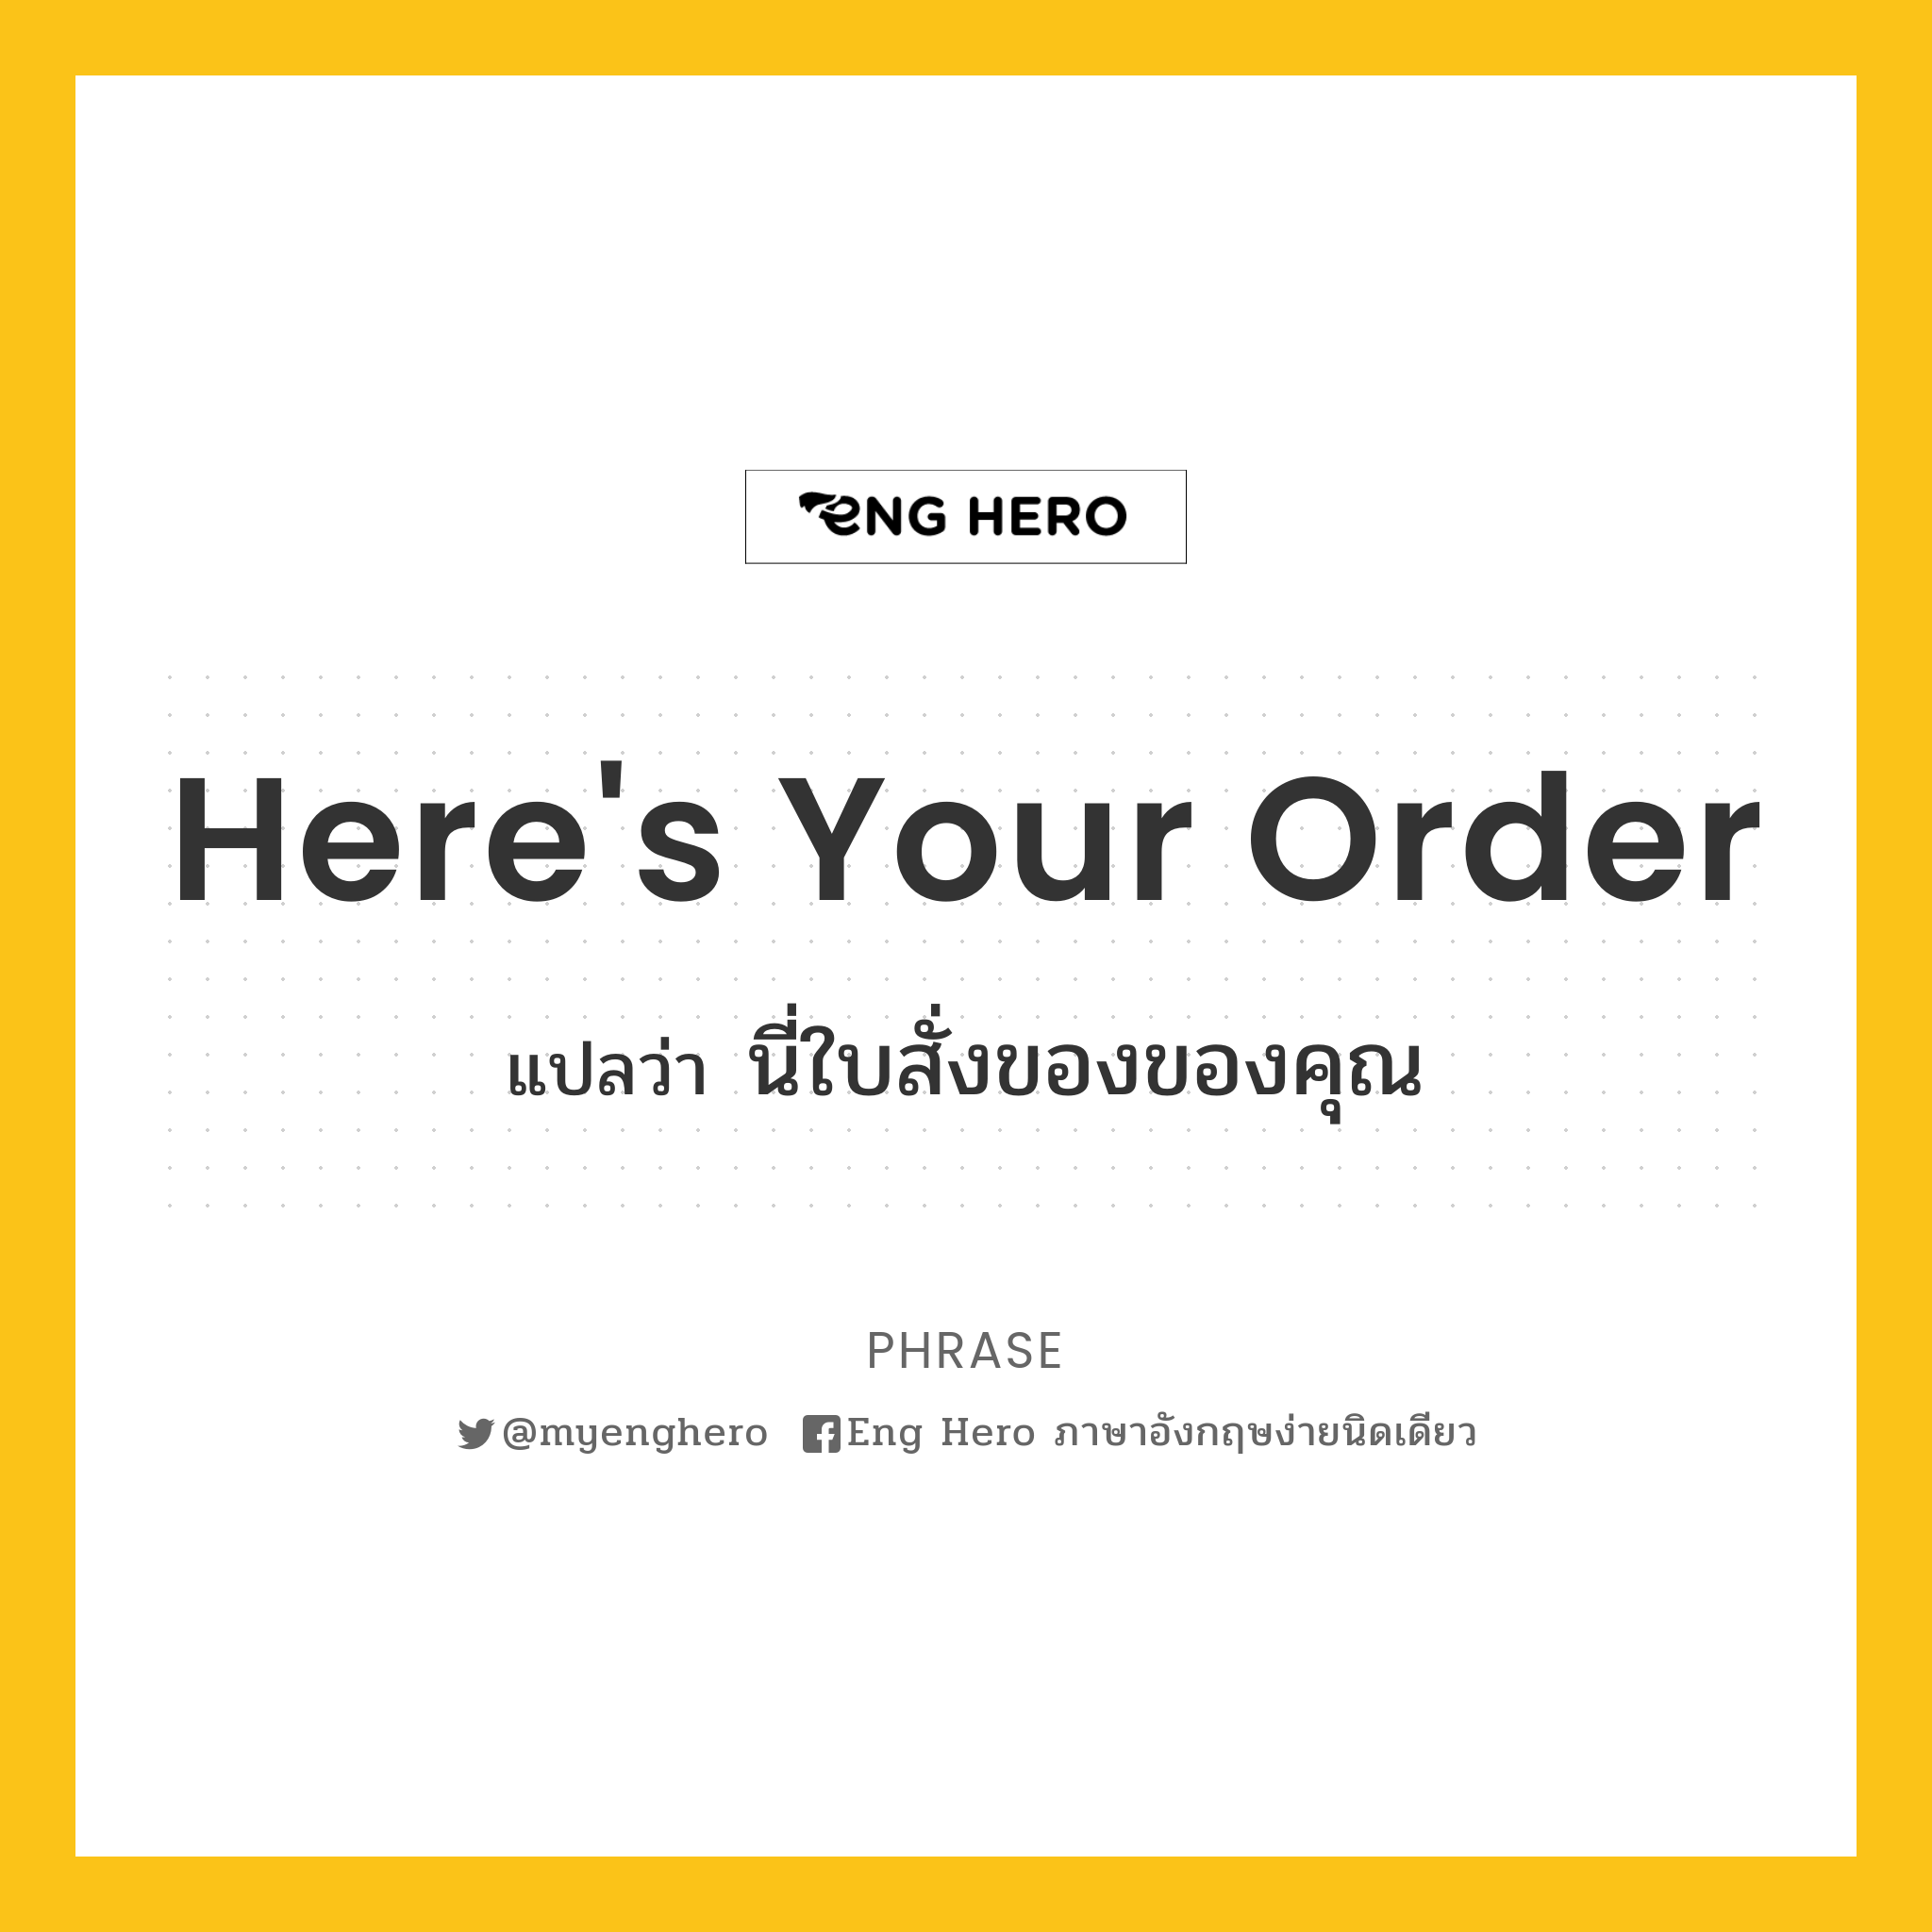 Here's your order